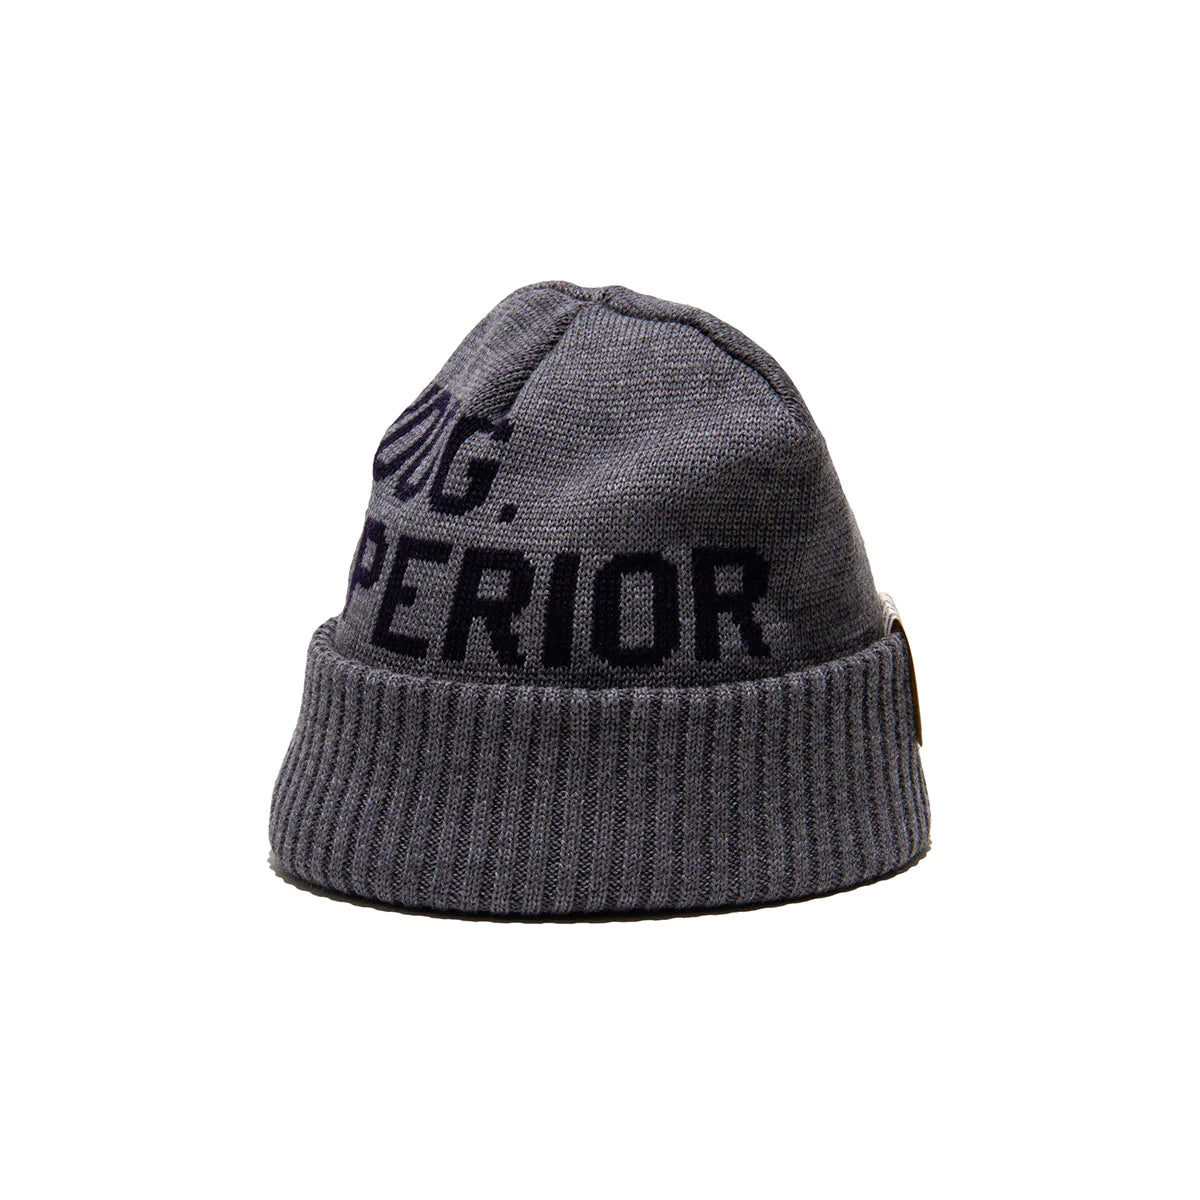 The H.W. Dog & Co - FACEMASK BEANIE - Gray